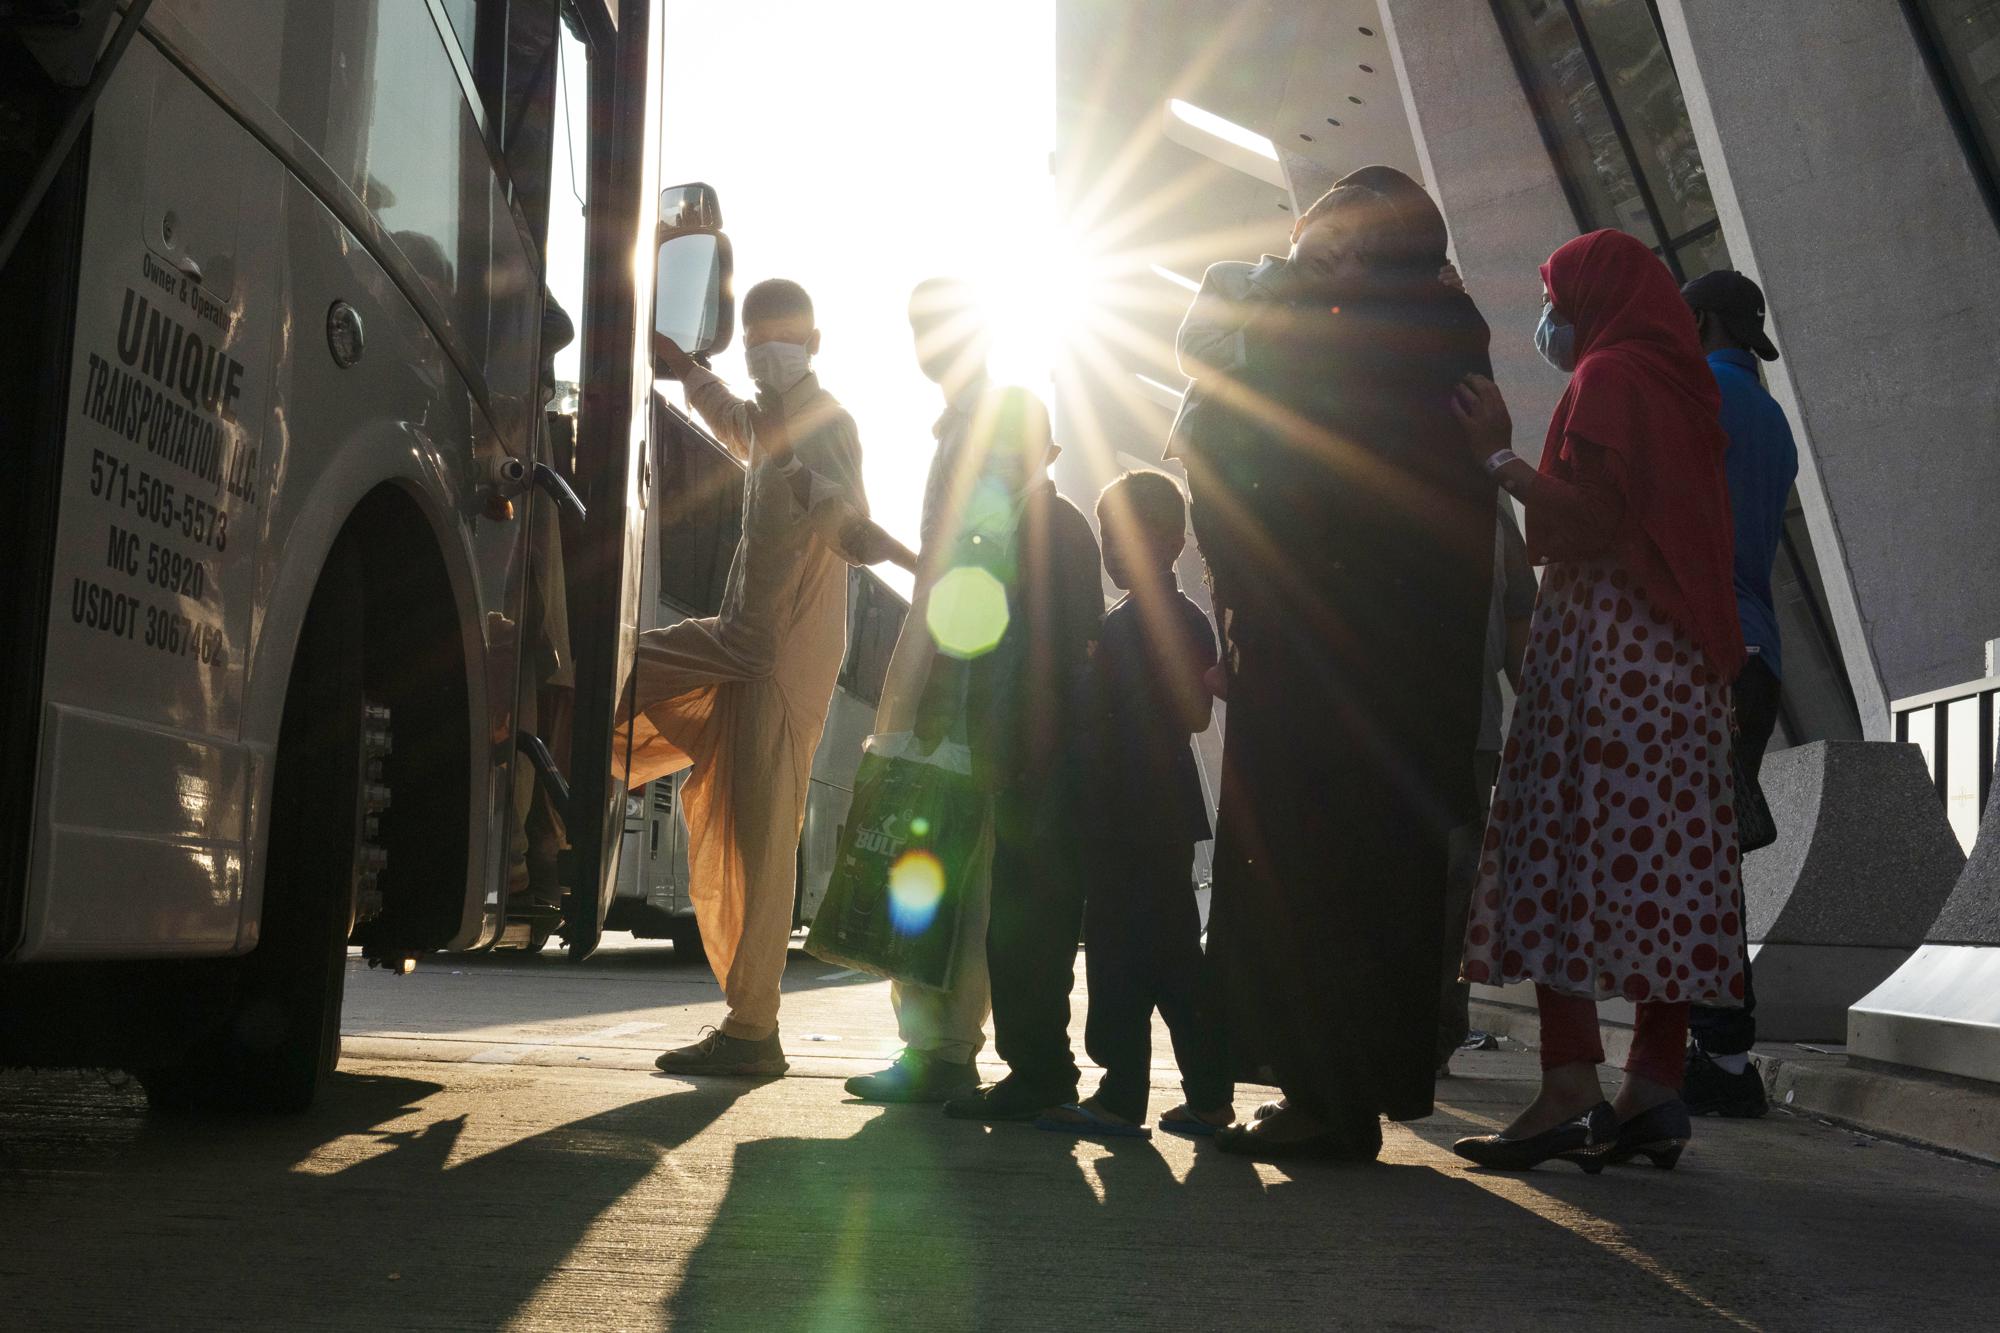 FILE - Families evacuated from Kabul, Afghanistan, wait to board a bus after they arrived at Washington Dulles International Airport, in Chantilly, Va., on Friday, Aug. 27, 2021. In late summer 2021, the Taliban seized power in Afghanistan. (AP Photo/Jose Luis Magana, File)